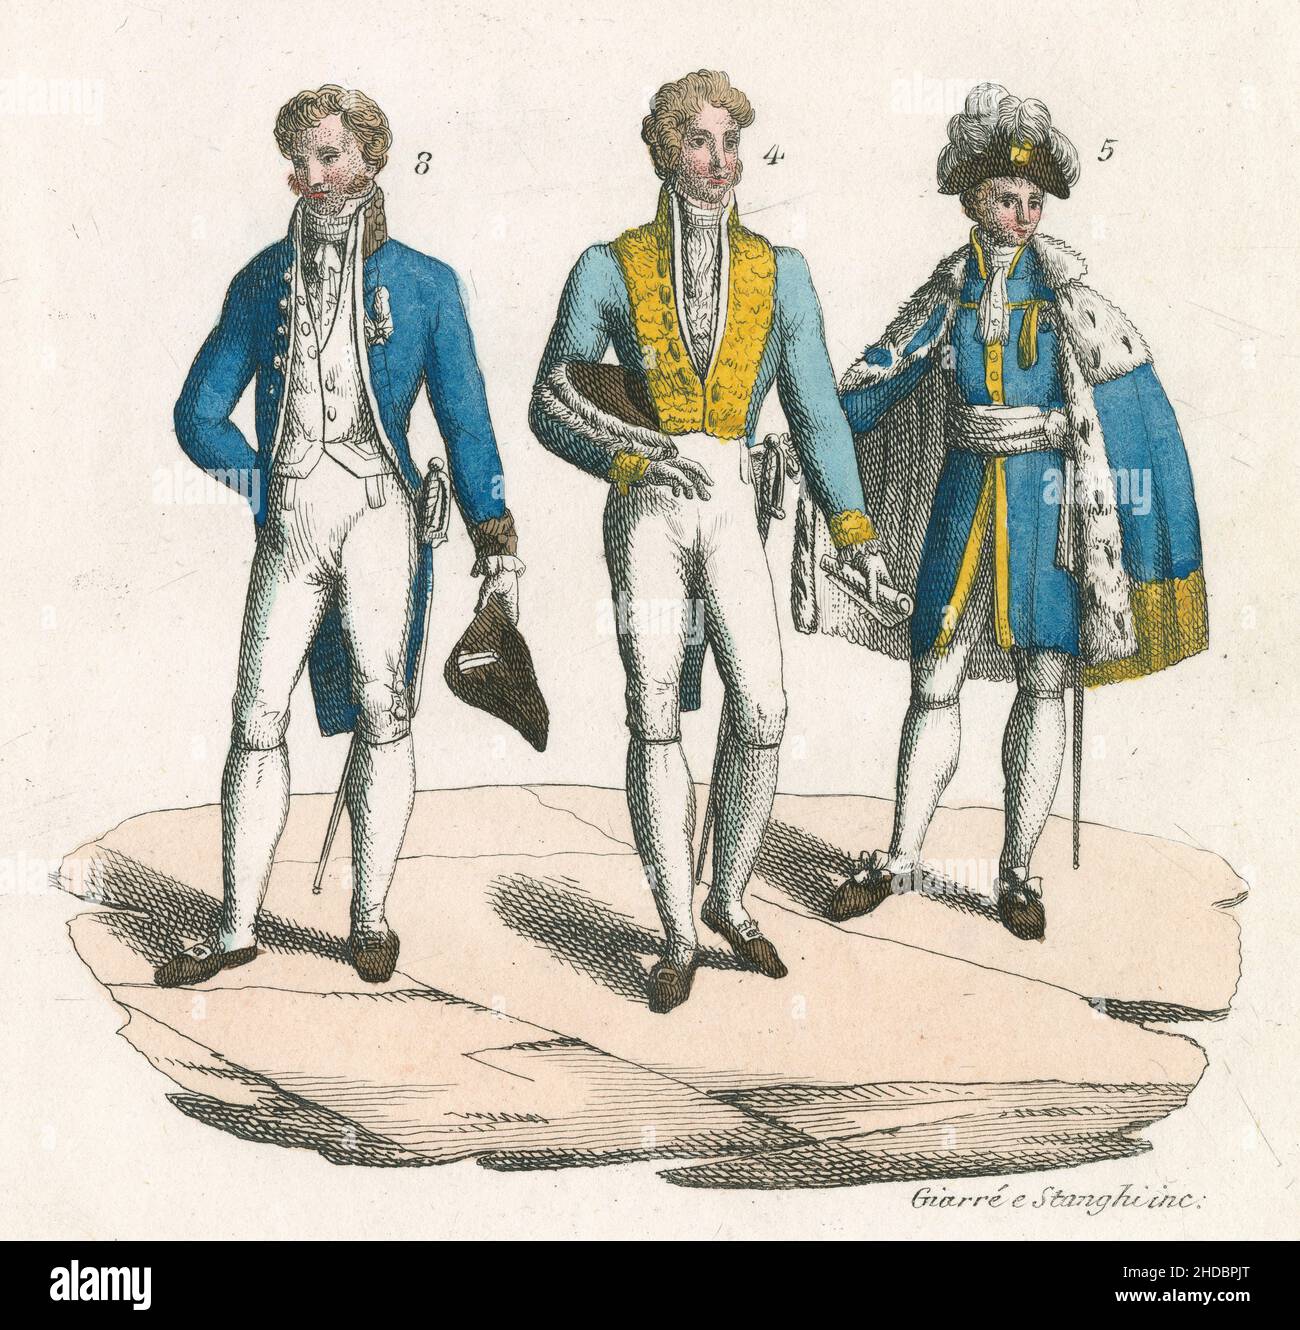 Antique c1830 hand-tinted engraving, fashions of the French court circa 1820. From l to r, (8) Deputy and (4+5) Peers of France in ceremonial dress. Published by Giulio Ferrario. SOURCE: ORIGINAL ENGRAVING Stock Photo